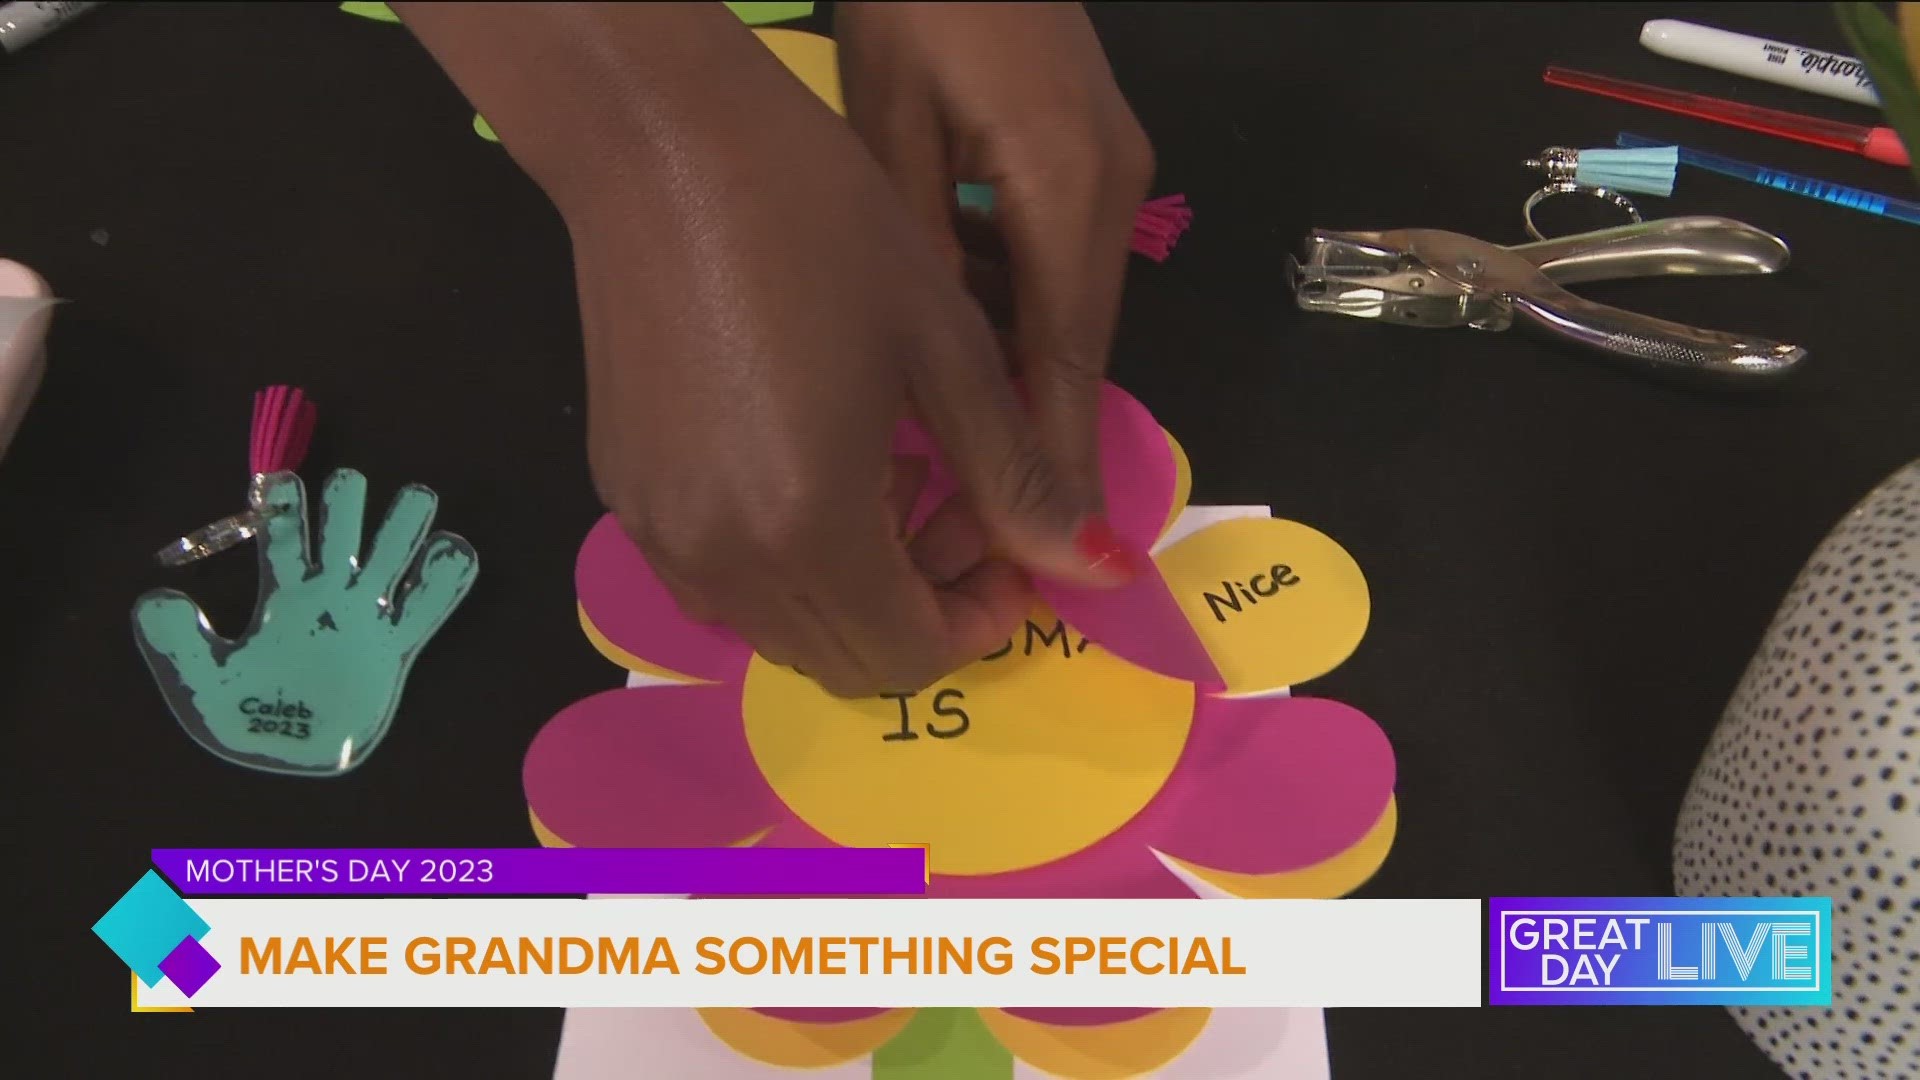 Don’t forget Grandma this Mother’s Day. Crafter extraordinaire Karimah Henry stopped by with some cute craft ideas just for grandma.